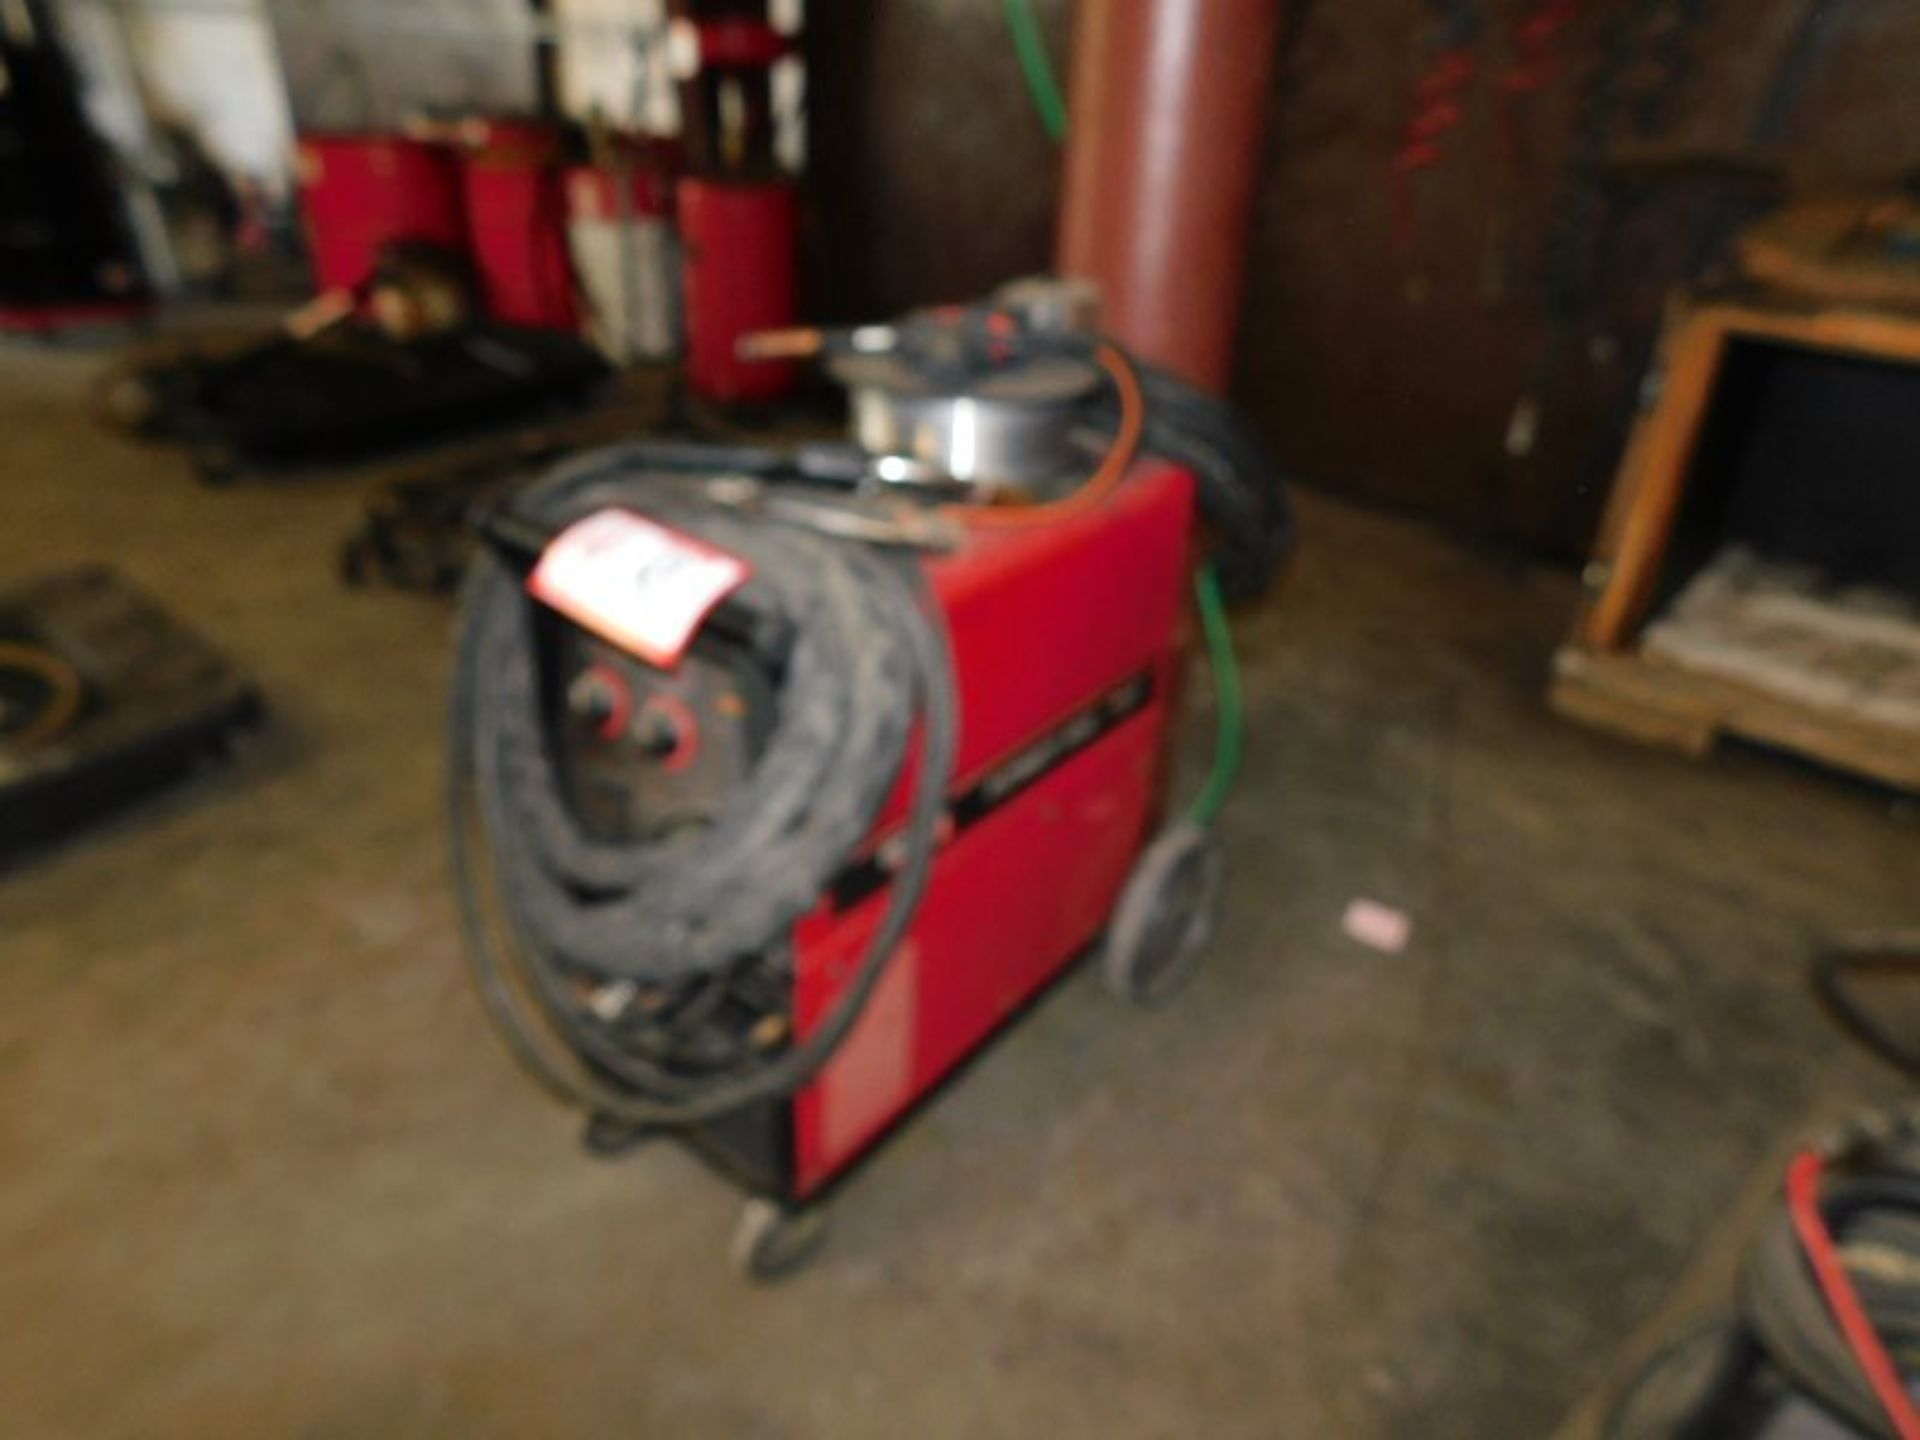 Lincoln Power Mate 255C 230 Volt, Single Phase Wire Feed Welder, W/Spool Gun - Image 2 of 2